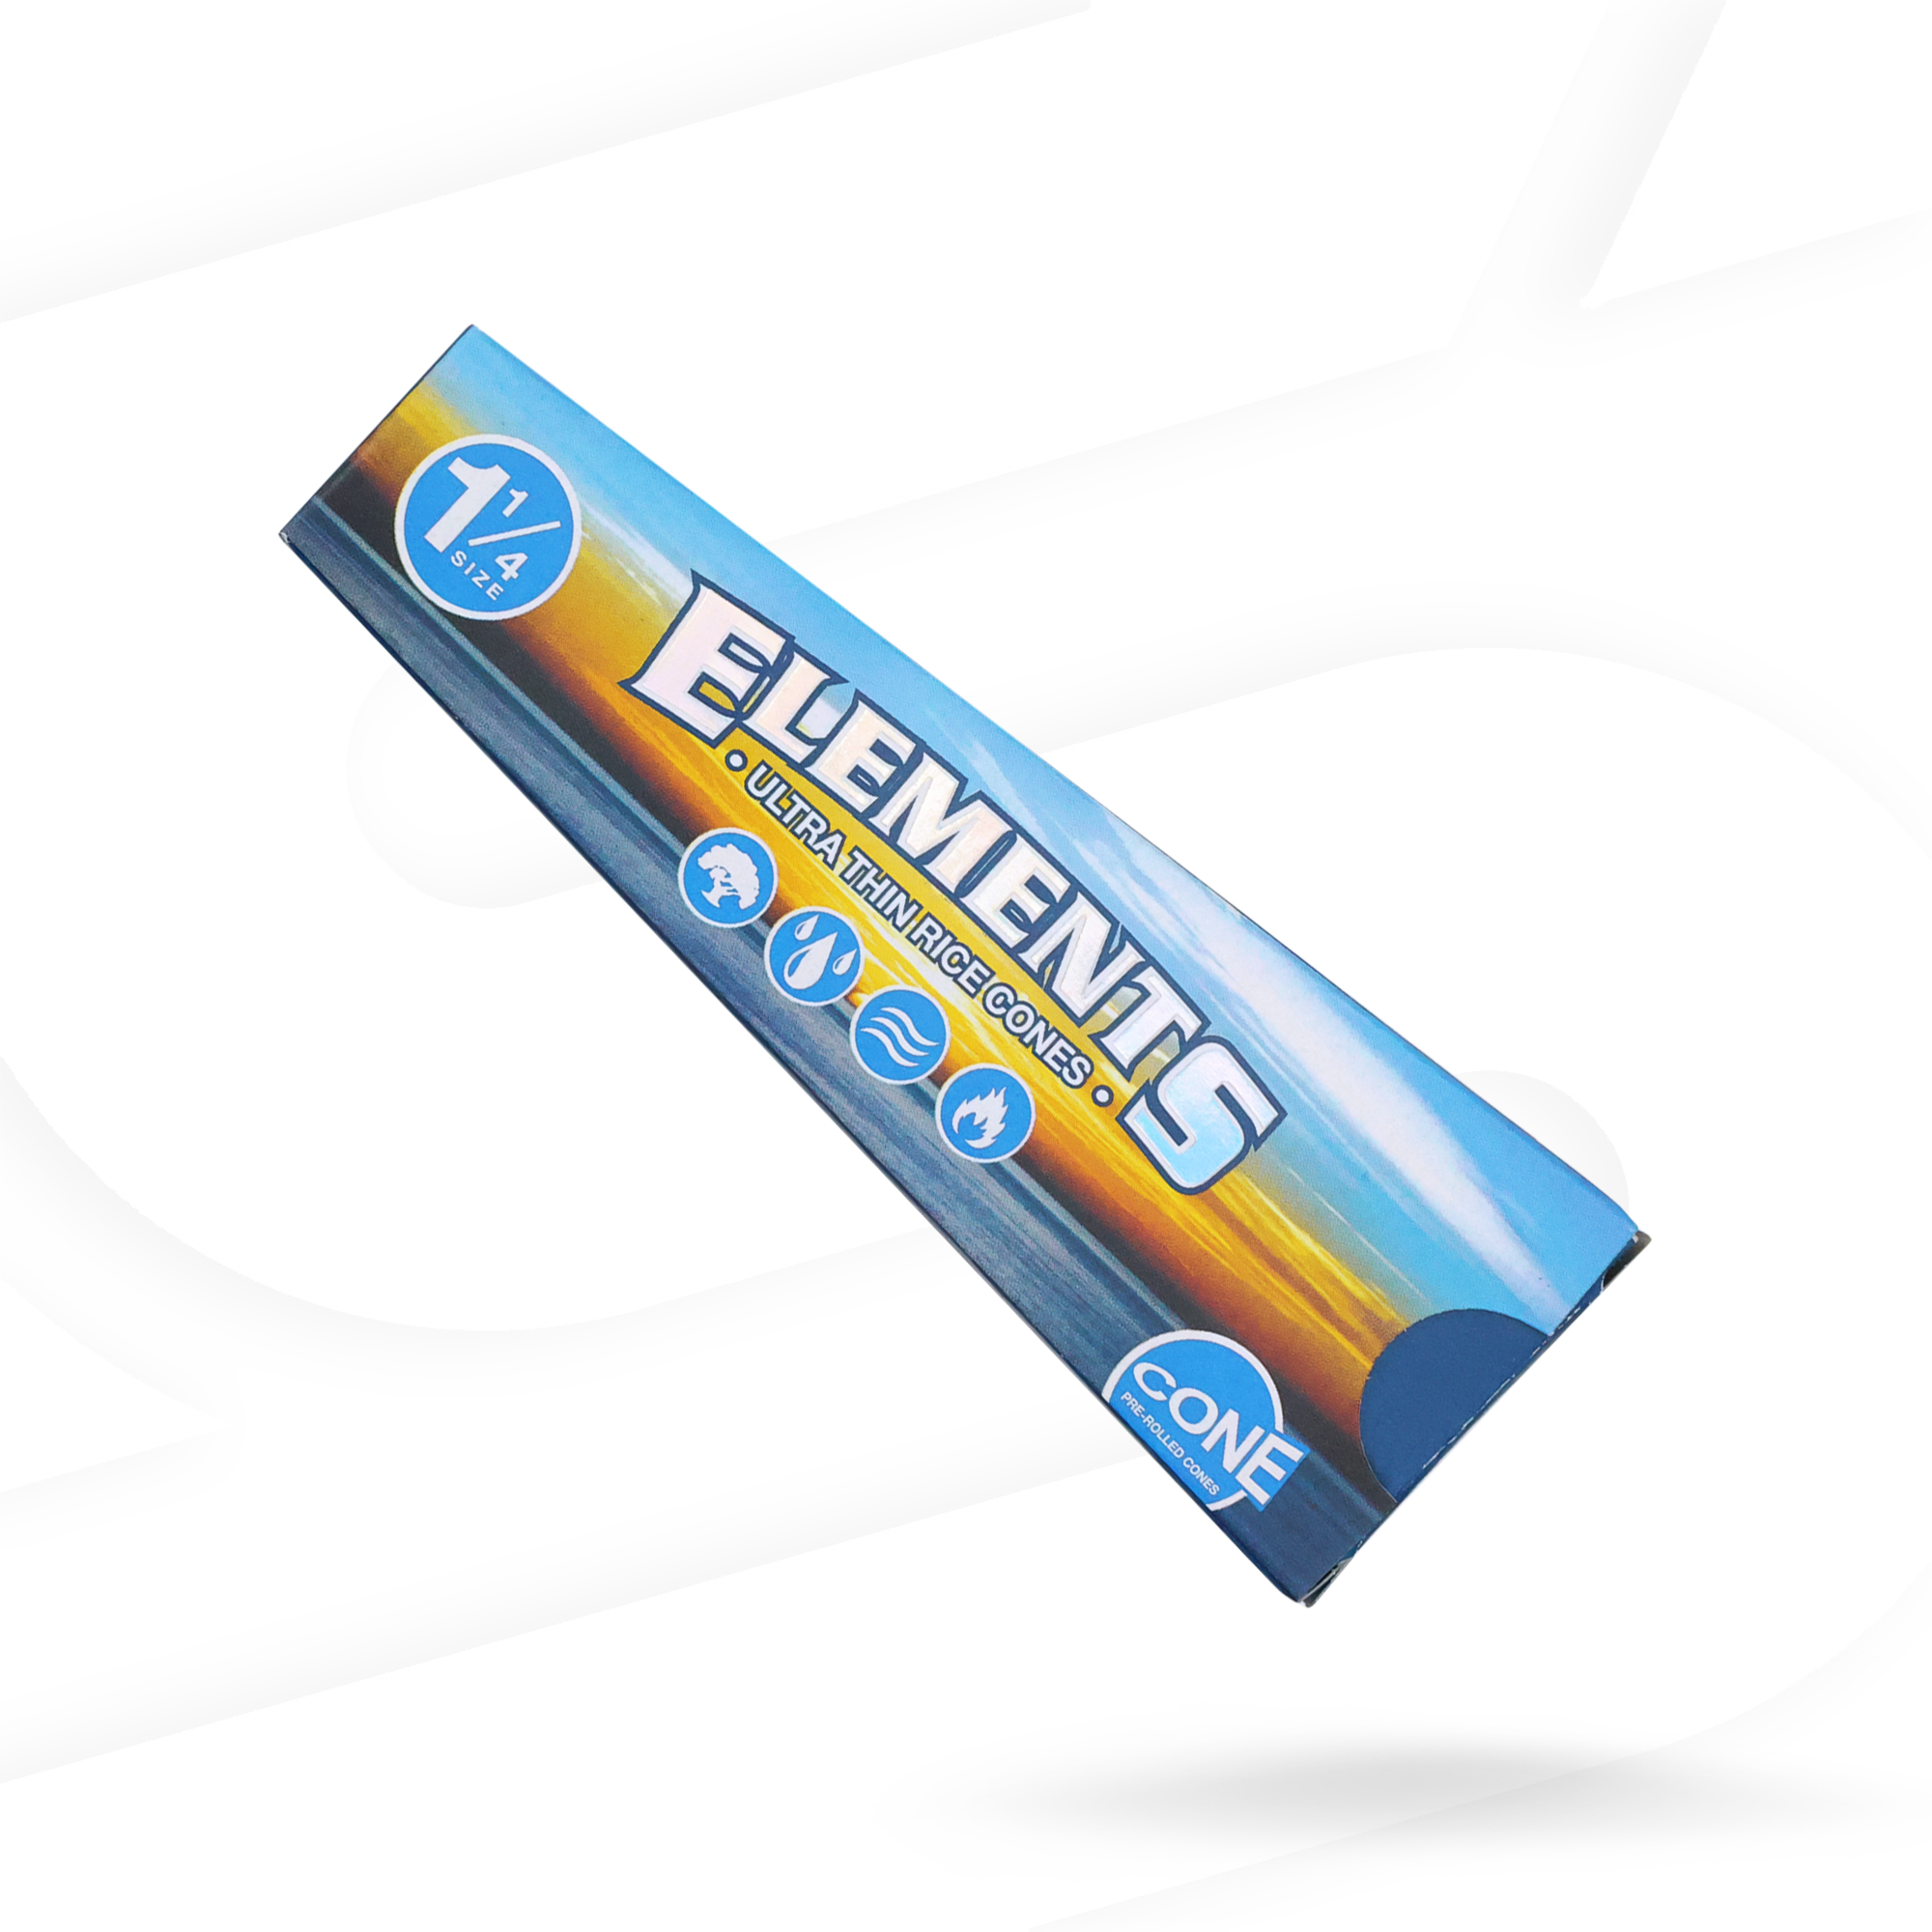 Elements Artesano King Size Slim Rolling Papers - ESD Official